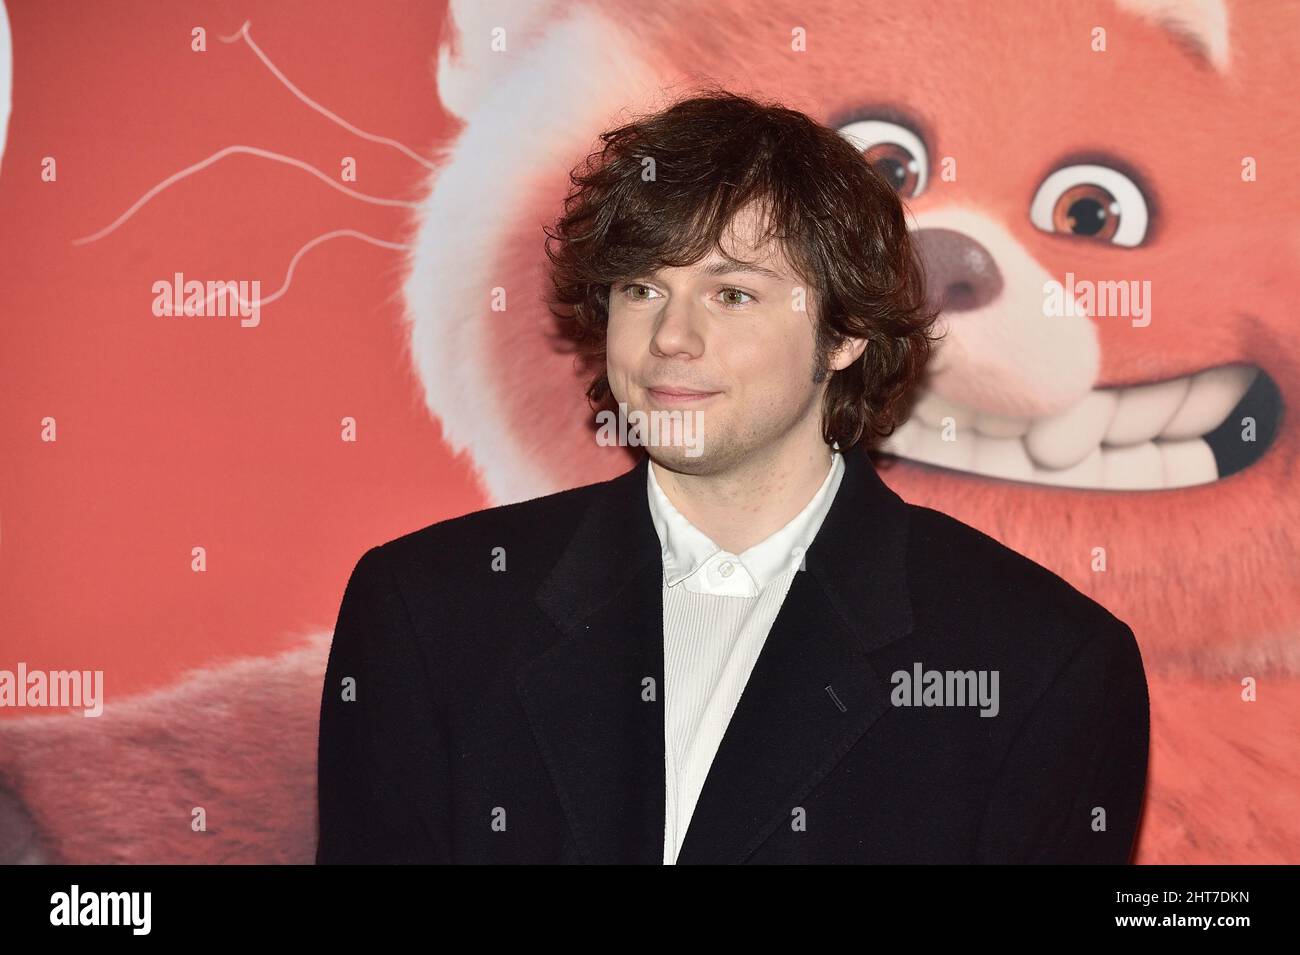 ROME, ITALY - FEBRUARY 25:Baltimora attends the 'Red' premiere at Cinema Moderno on February 25, 2022 in Rome, Italy. Stock Photo